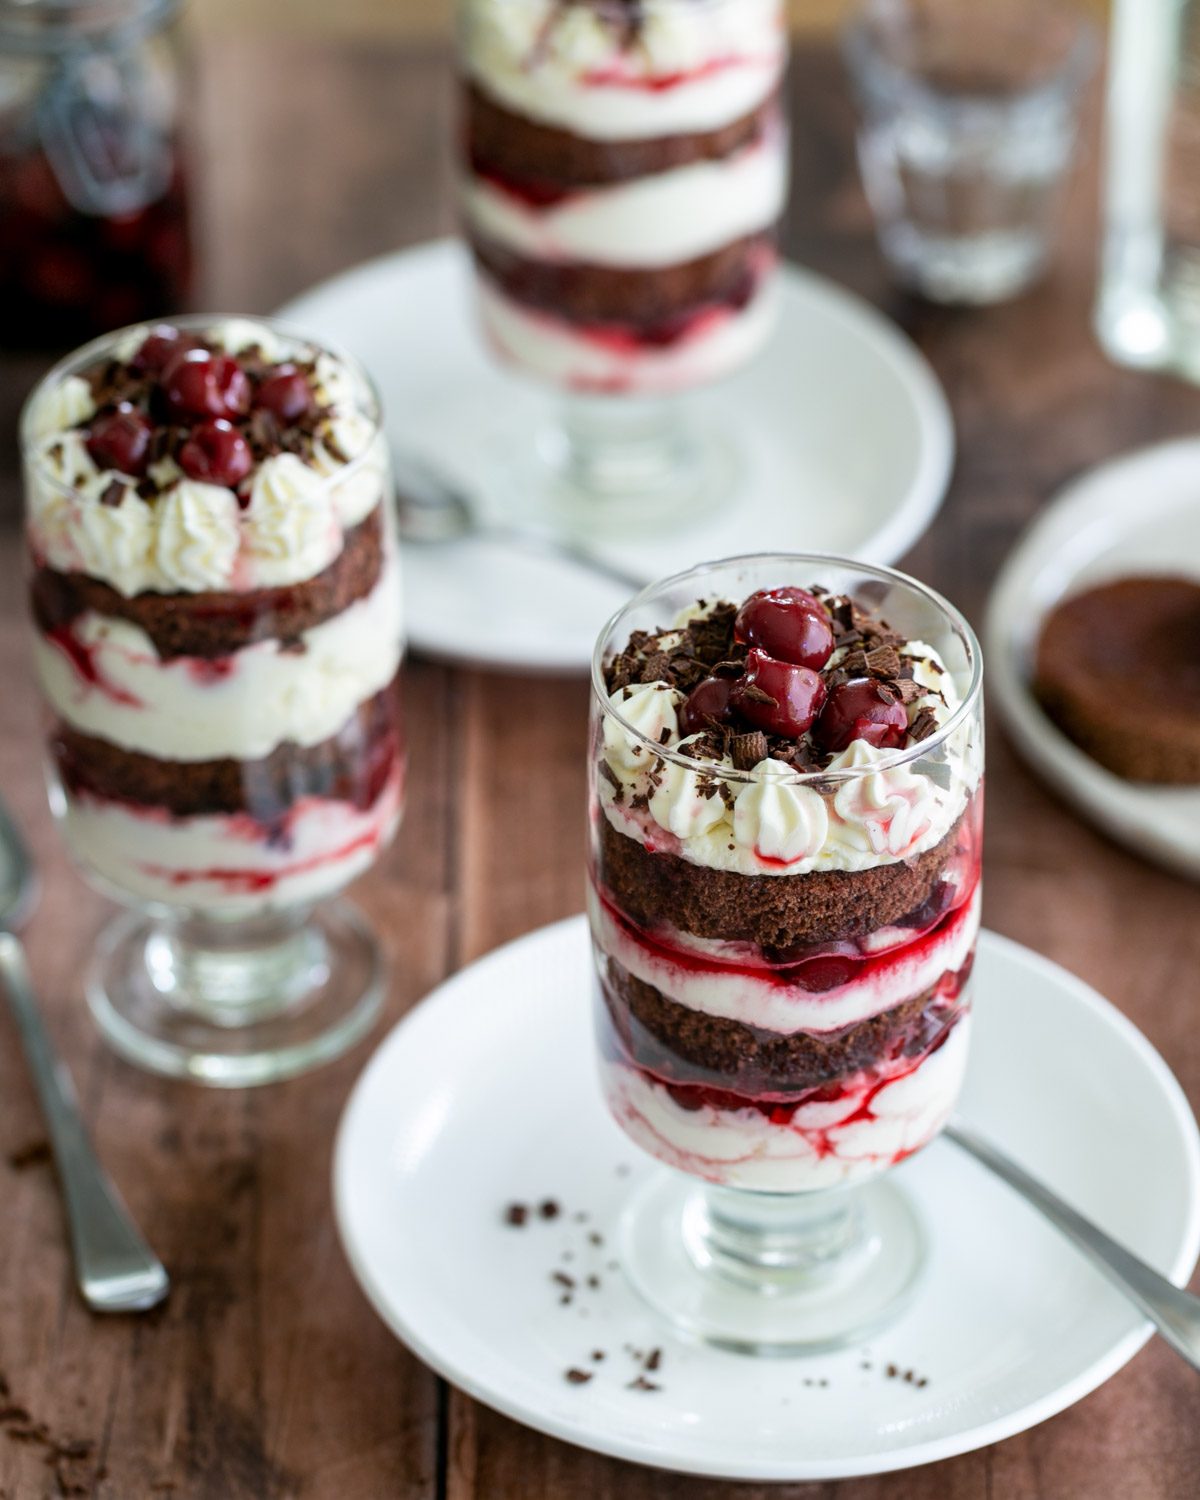 Chilled German Black Forest Cake in a Glass